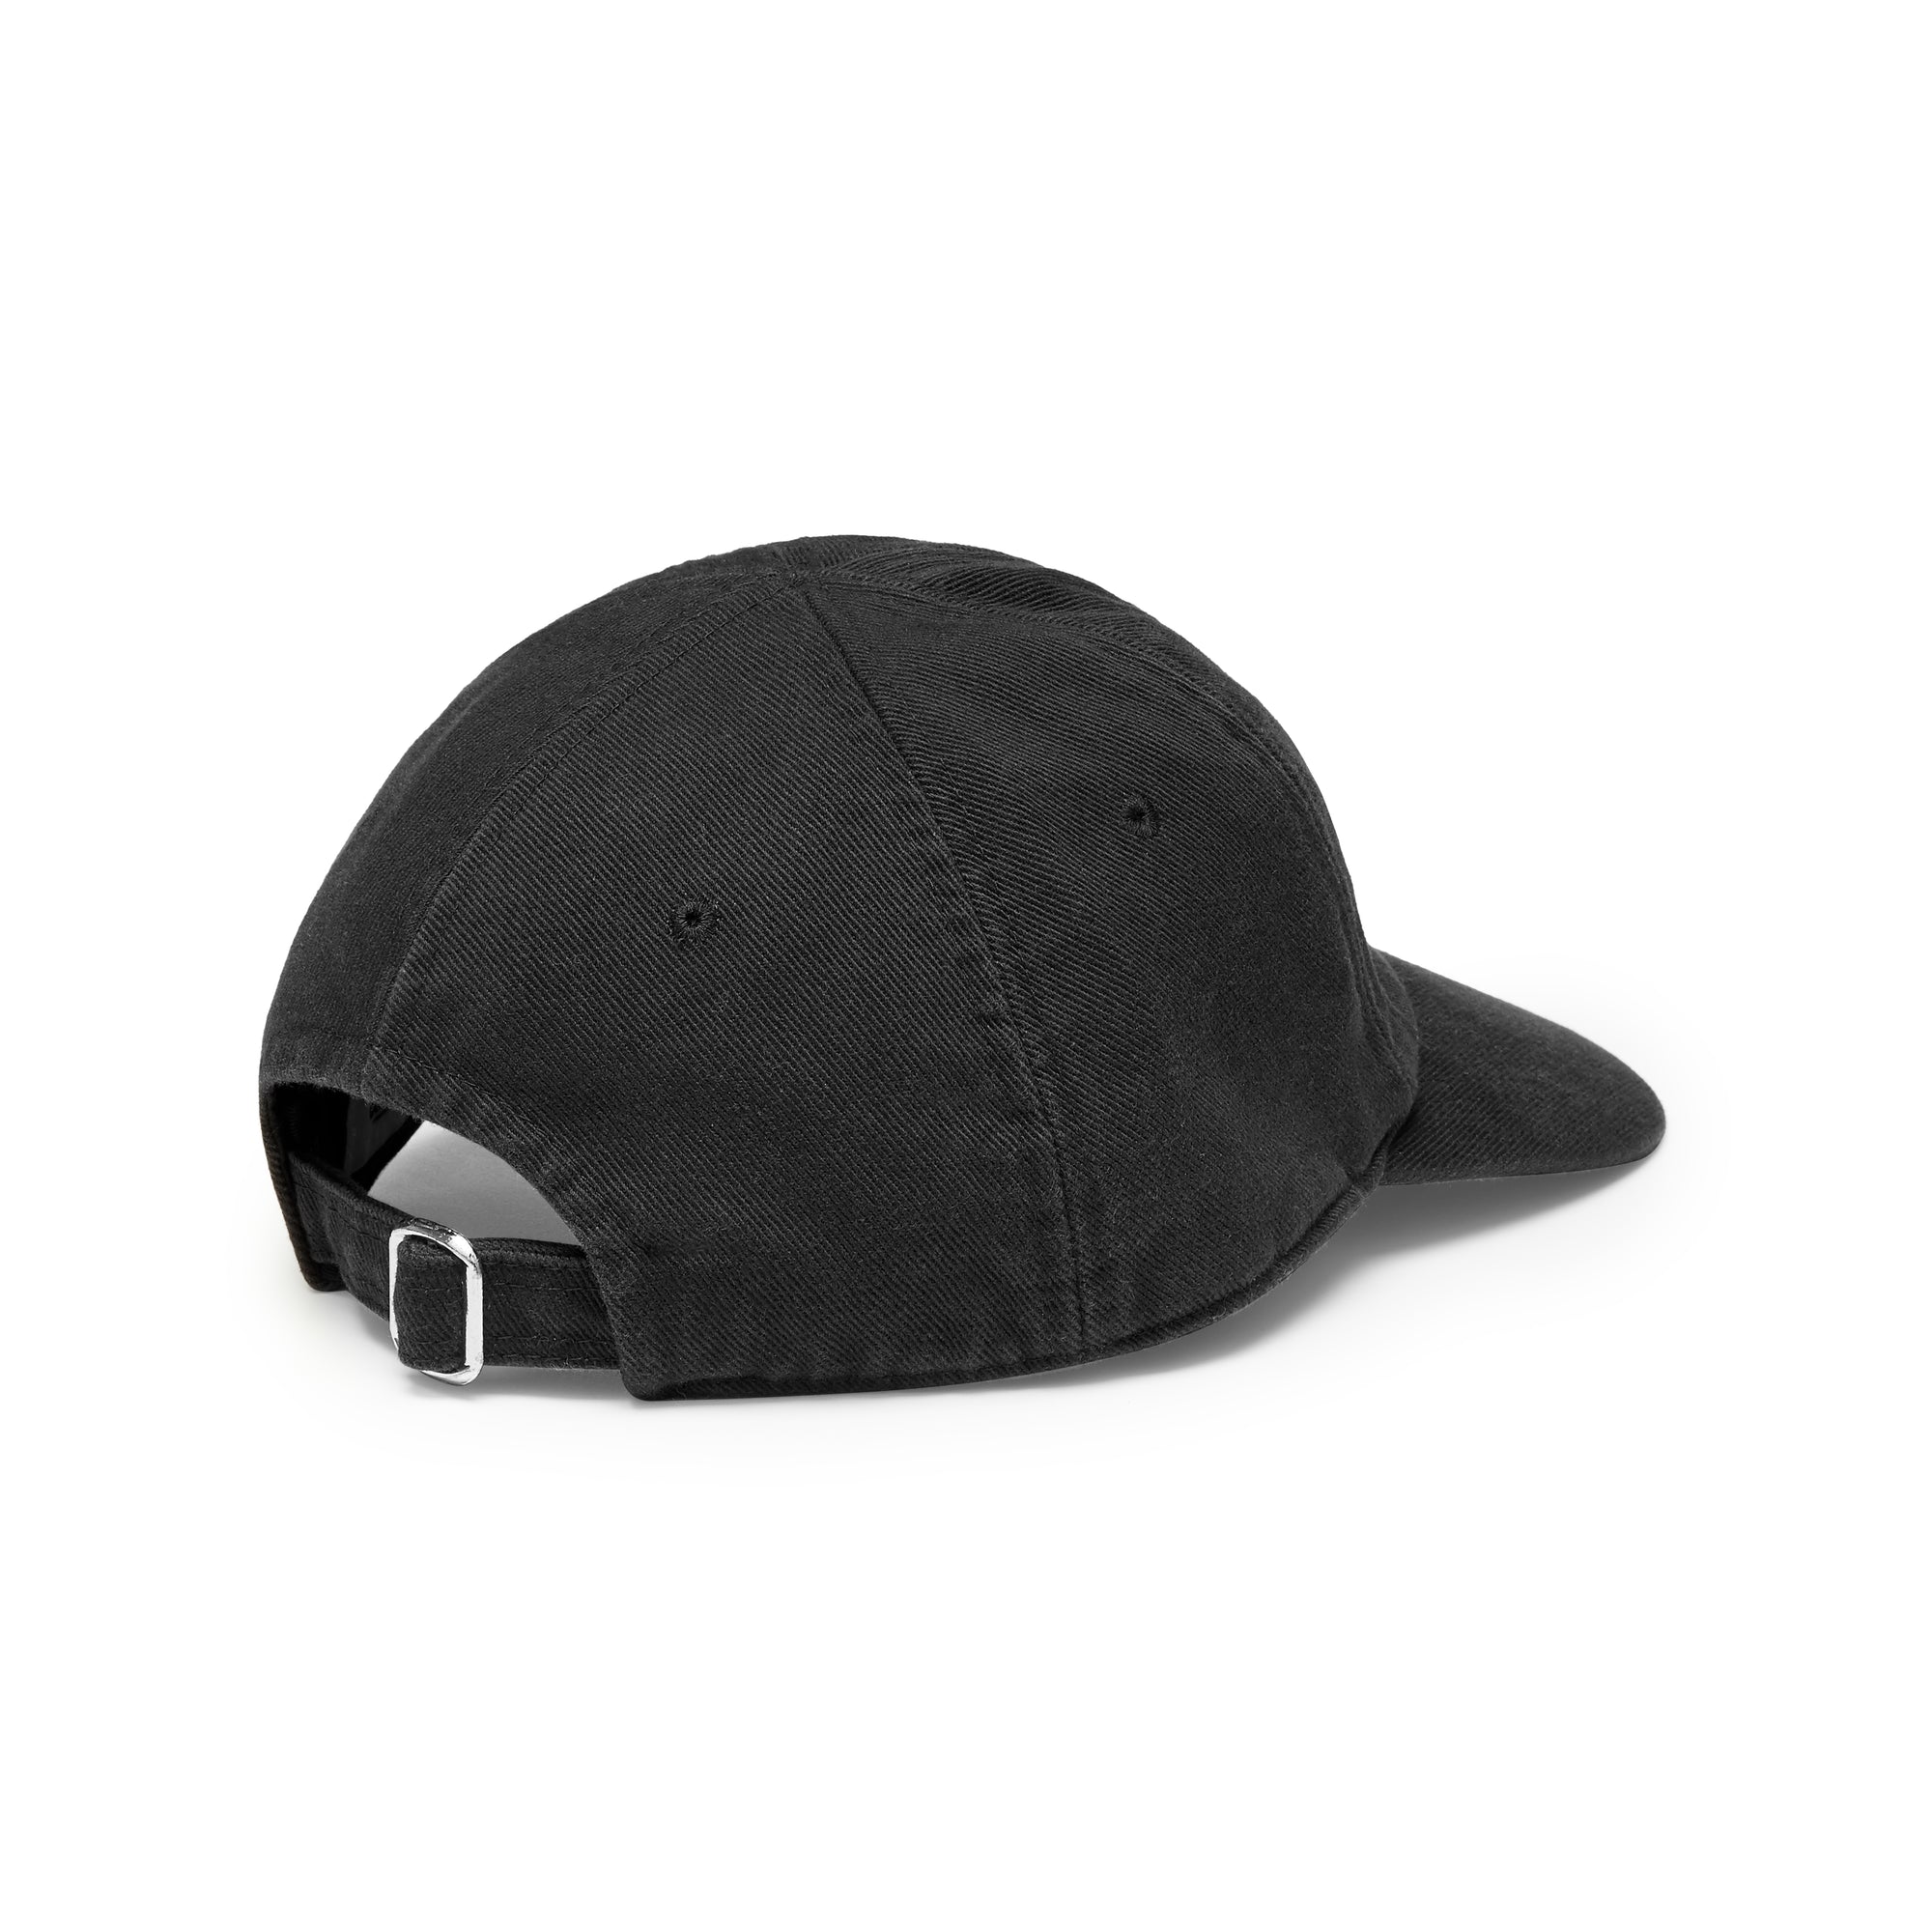 Doublet - Men's SD Card Embroidery Cap - (Black) view 3